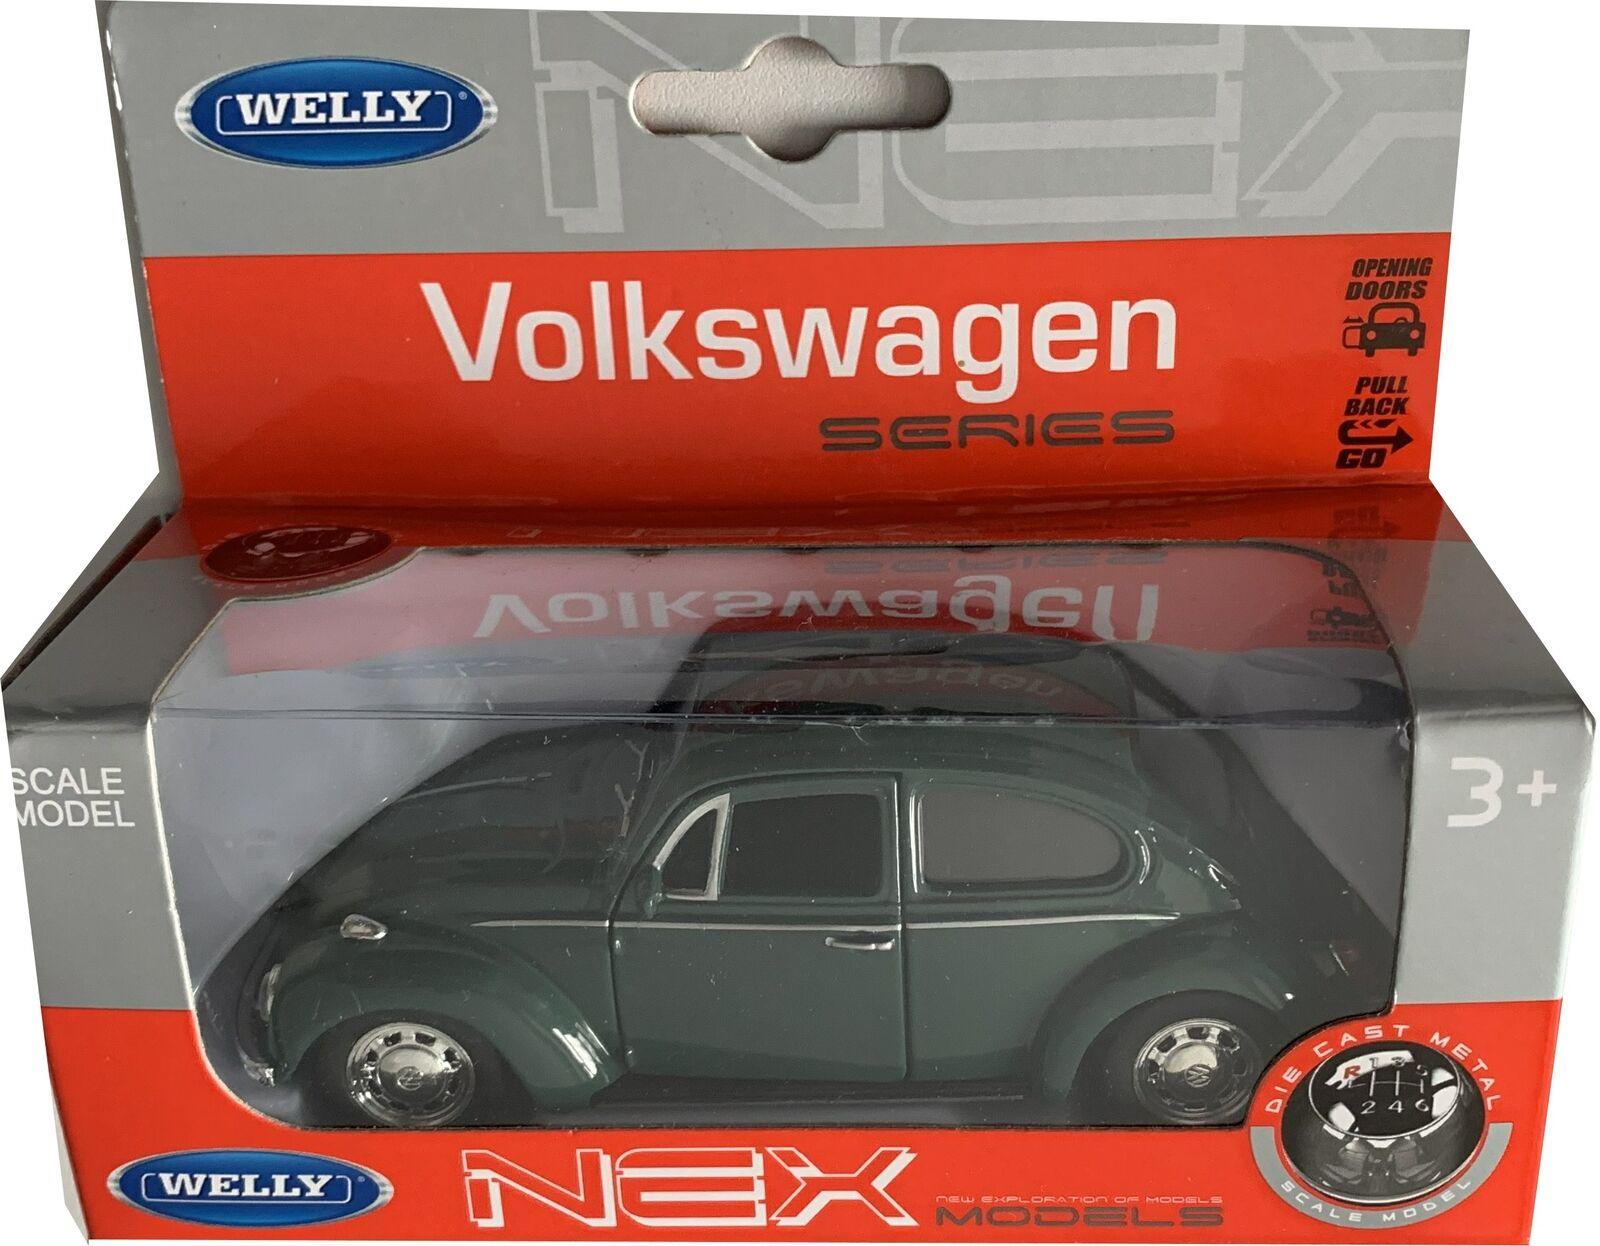 VW Beetle in green 1:34 - 1:39 scale diecast model from Welly